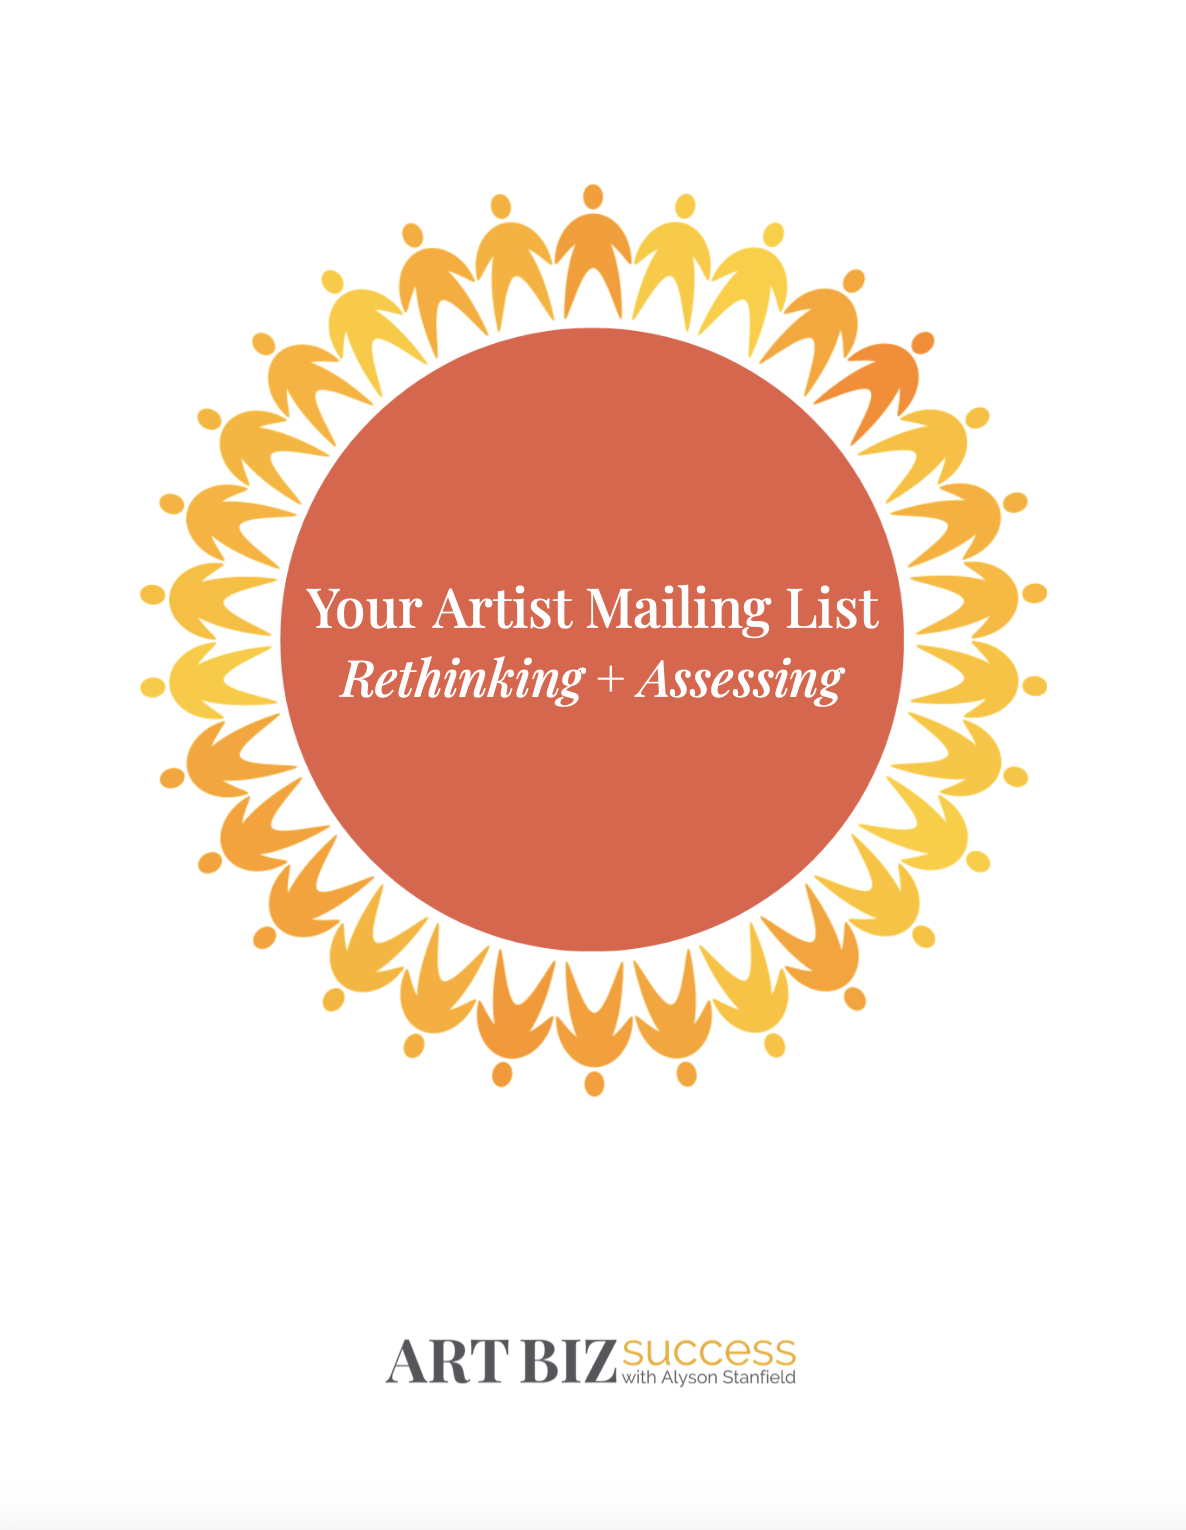 Your Artist Mailing List report